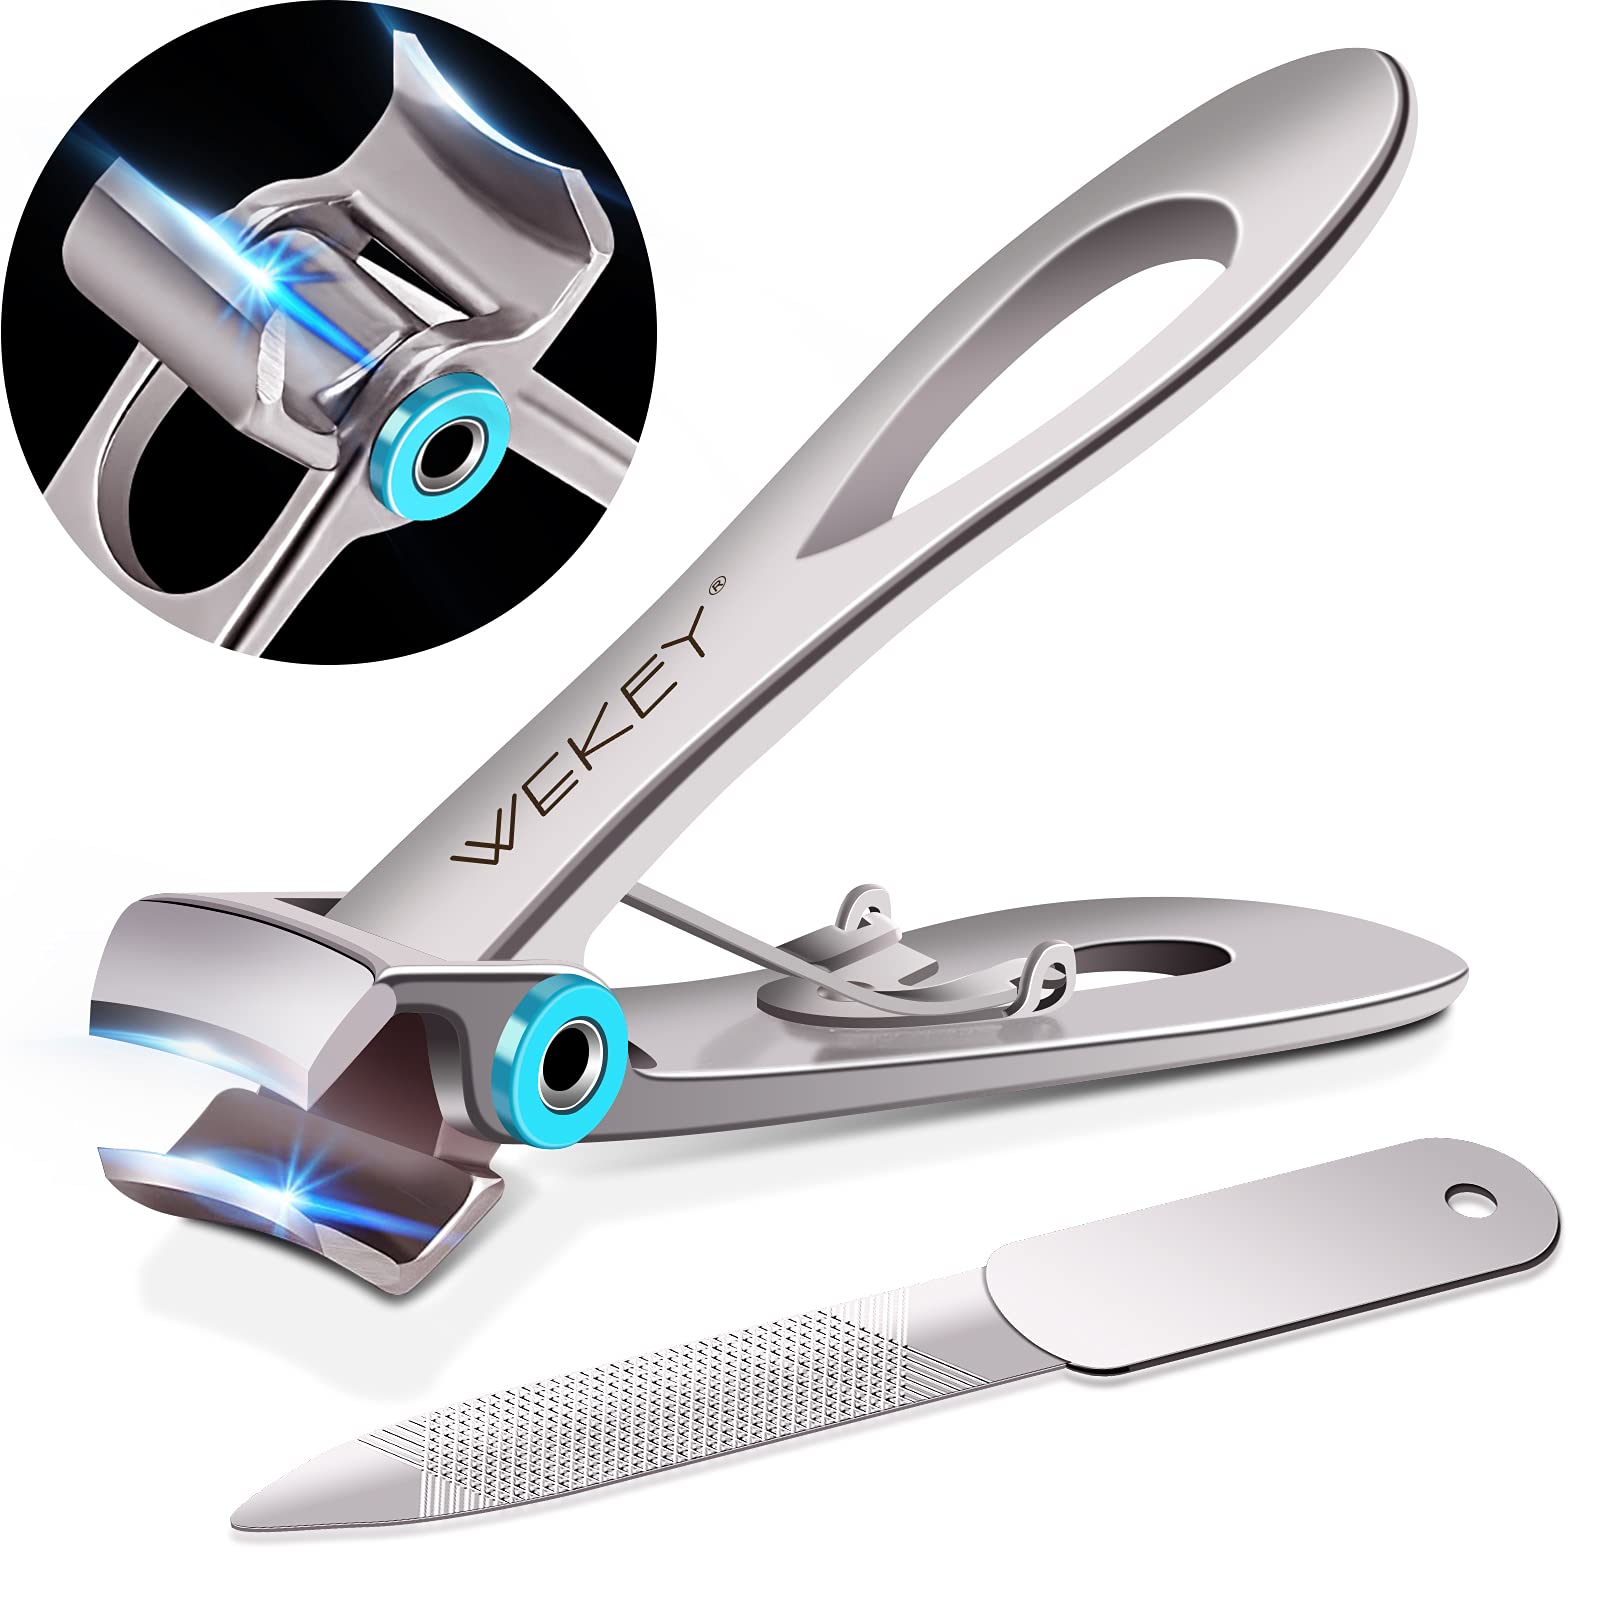 Toe Nail Clippers Adult - Nail Clippers for Thick Nails with Oversized Wide  Jaw Opening 15mm,Heavy Duty Toe Nail Clippers, Men and Seniors - by WEKEY